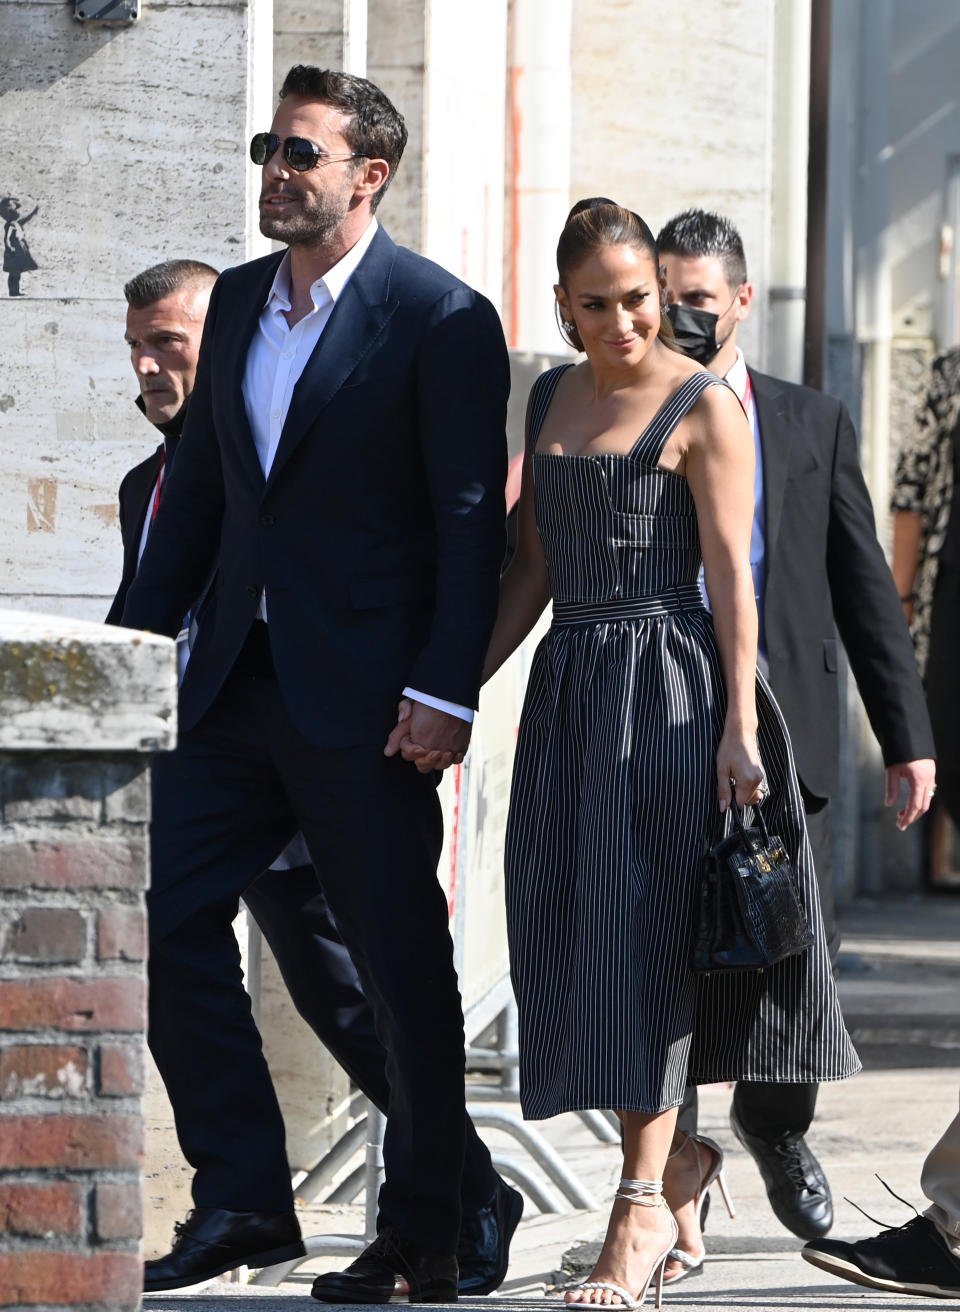 Ben Affleck and Jennifer Lopez leave at the 78th Venice International Film Festival on September 10, 2021 in Venice, Italy. (Getty Images)